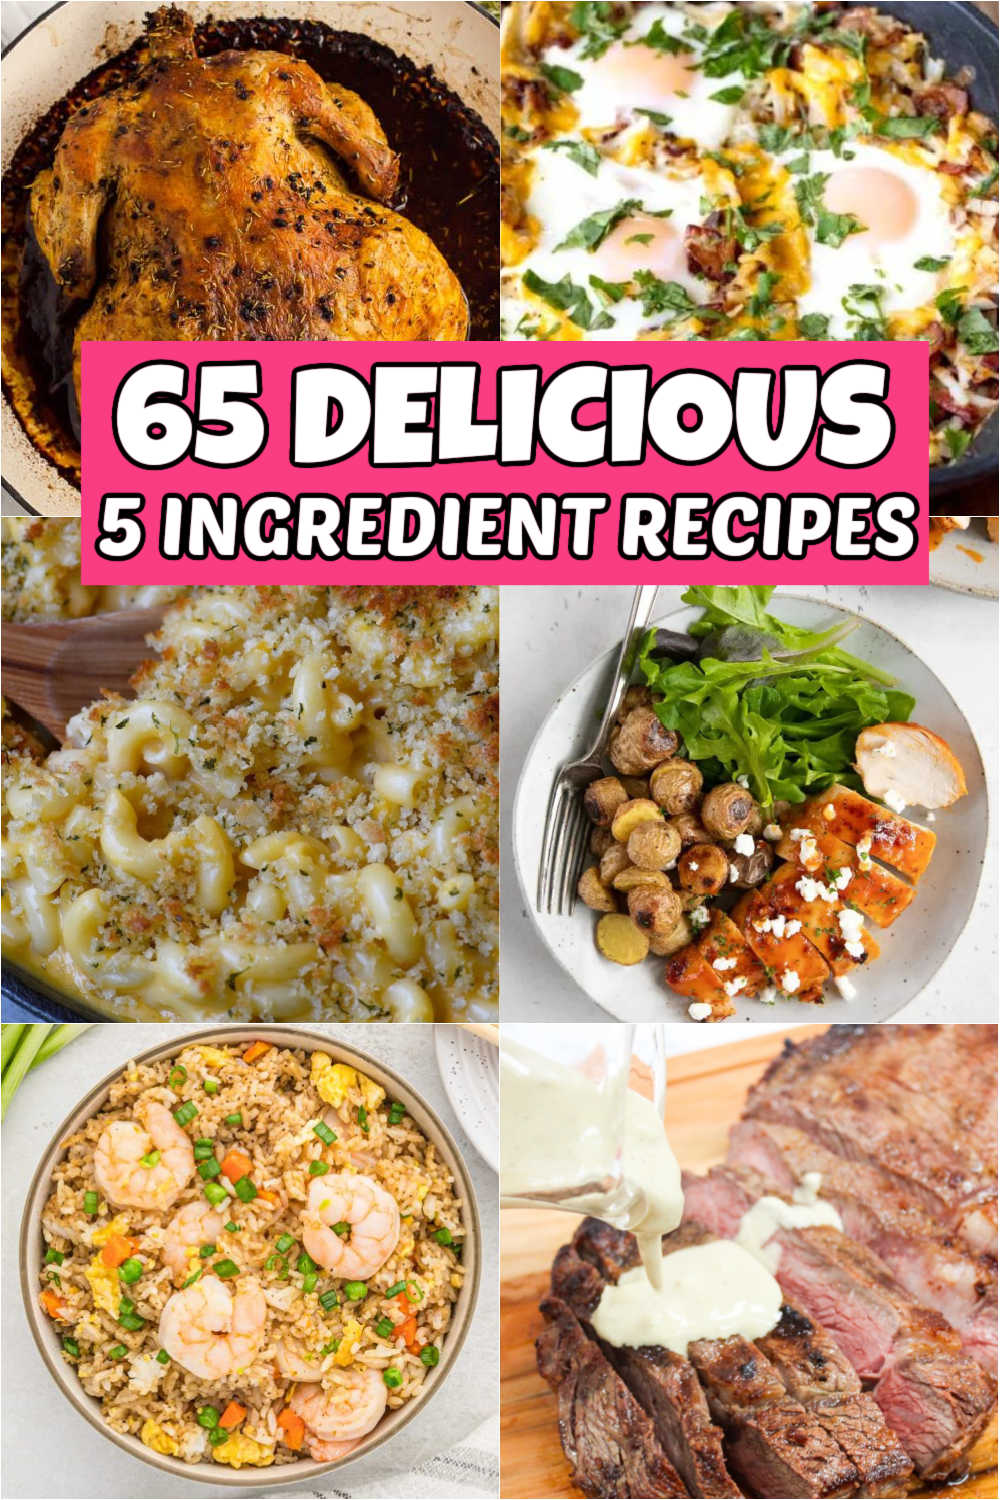 Are you tired of complicated recipes with a laundry list of ingredients? Look no further than these easy 5 ingredient recipes. You will love these meal ideas to get done and on the table. These five-ingredient recipes combine pantry staples for an easy weeknight meal. #eatingonadime #5ingredientrecipes #5ingredients